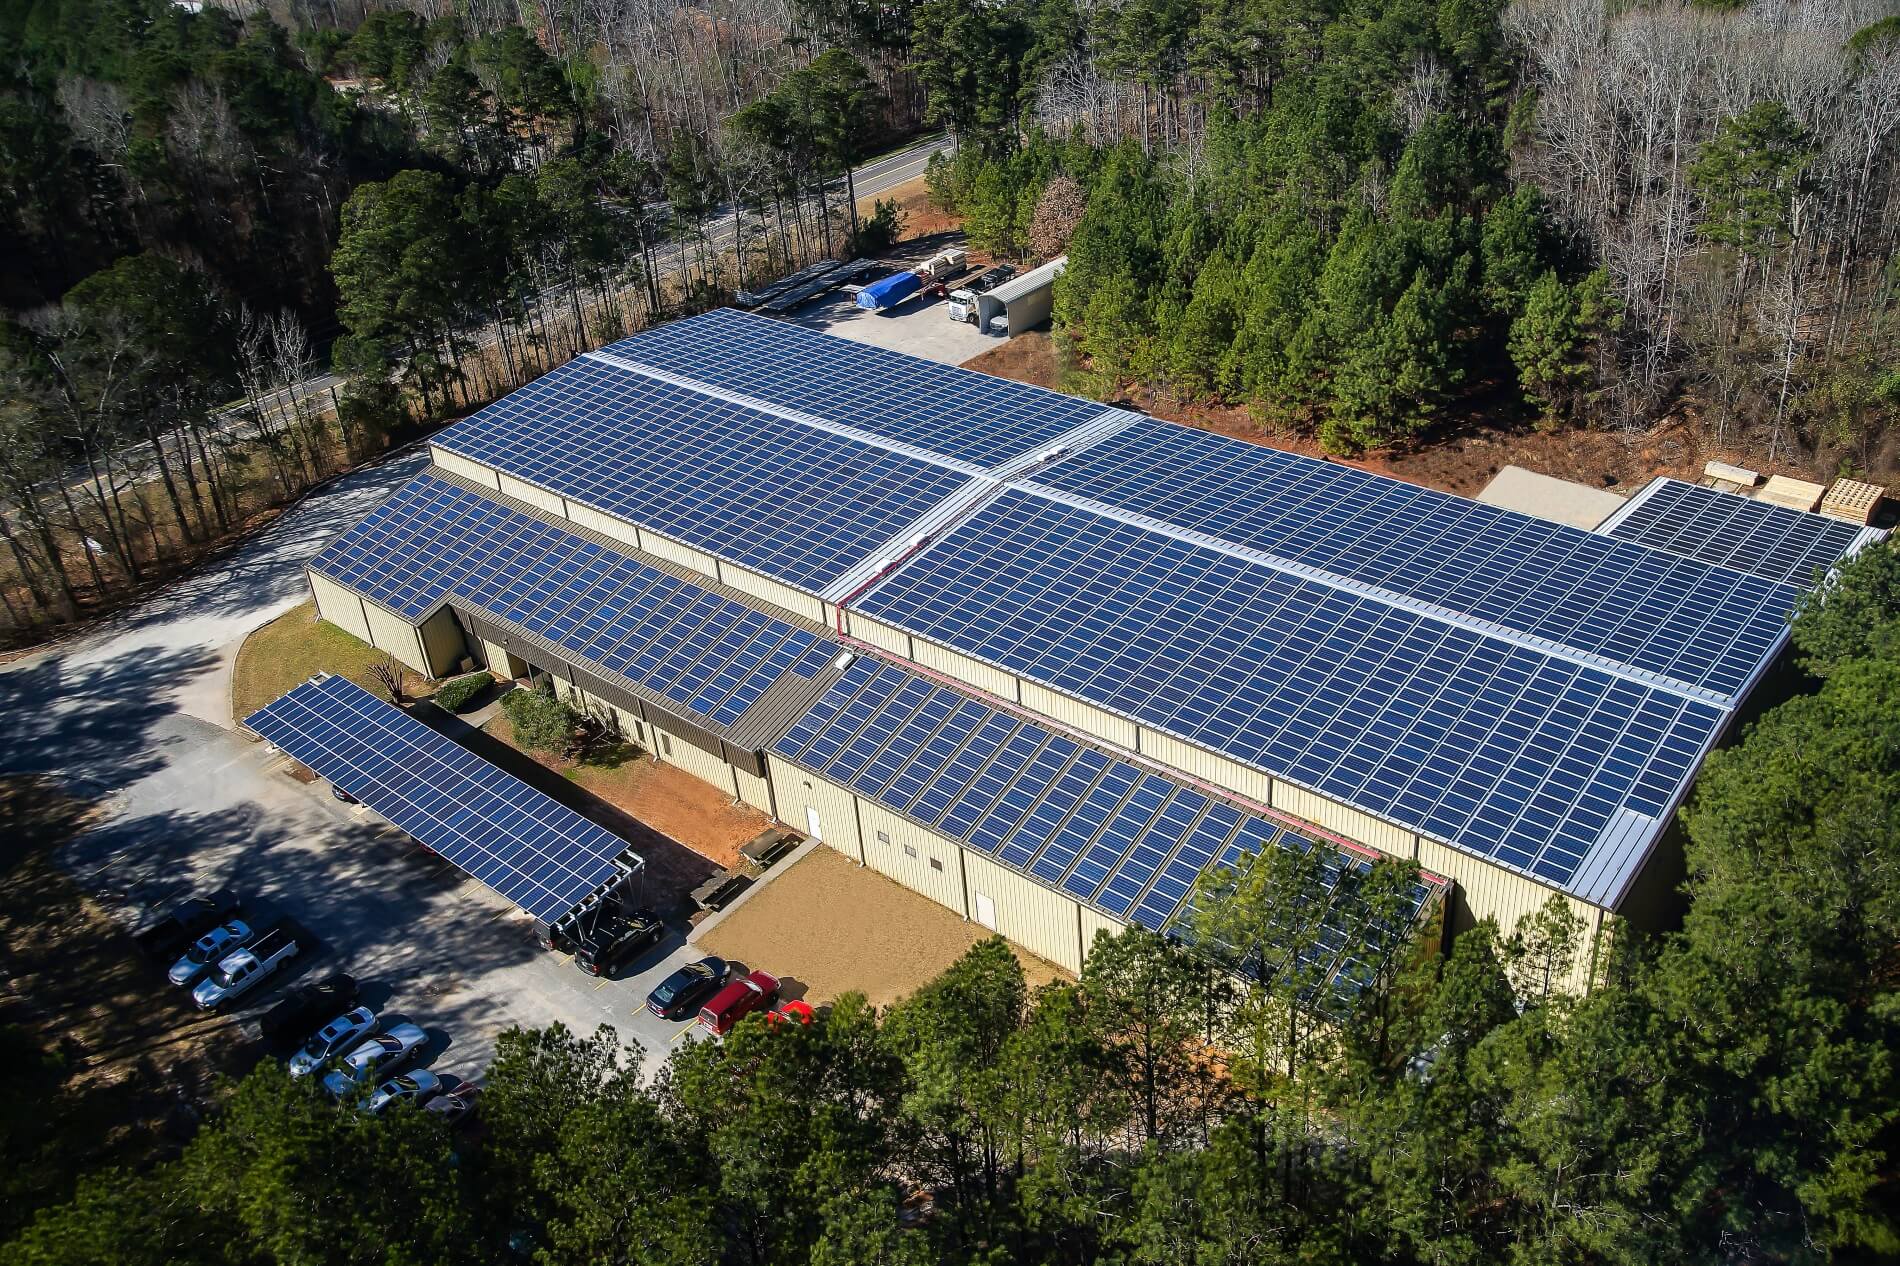 McElroy Metal re-roofs Peachtree facility, adds solar panels